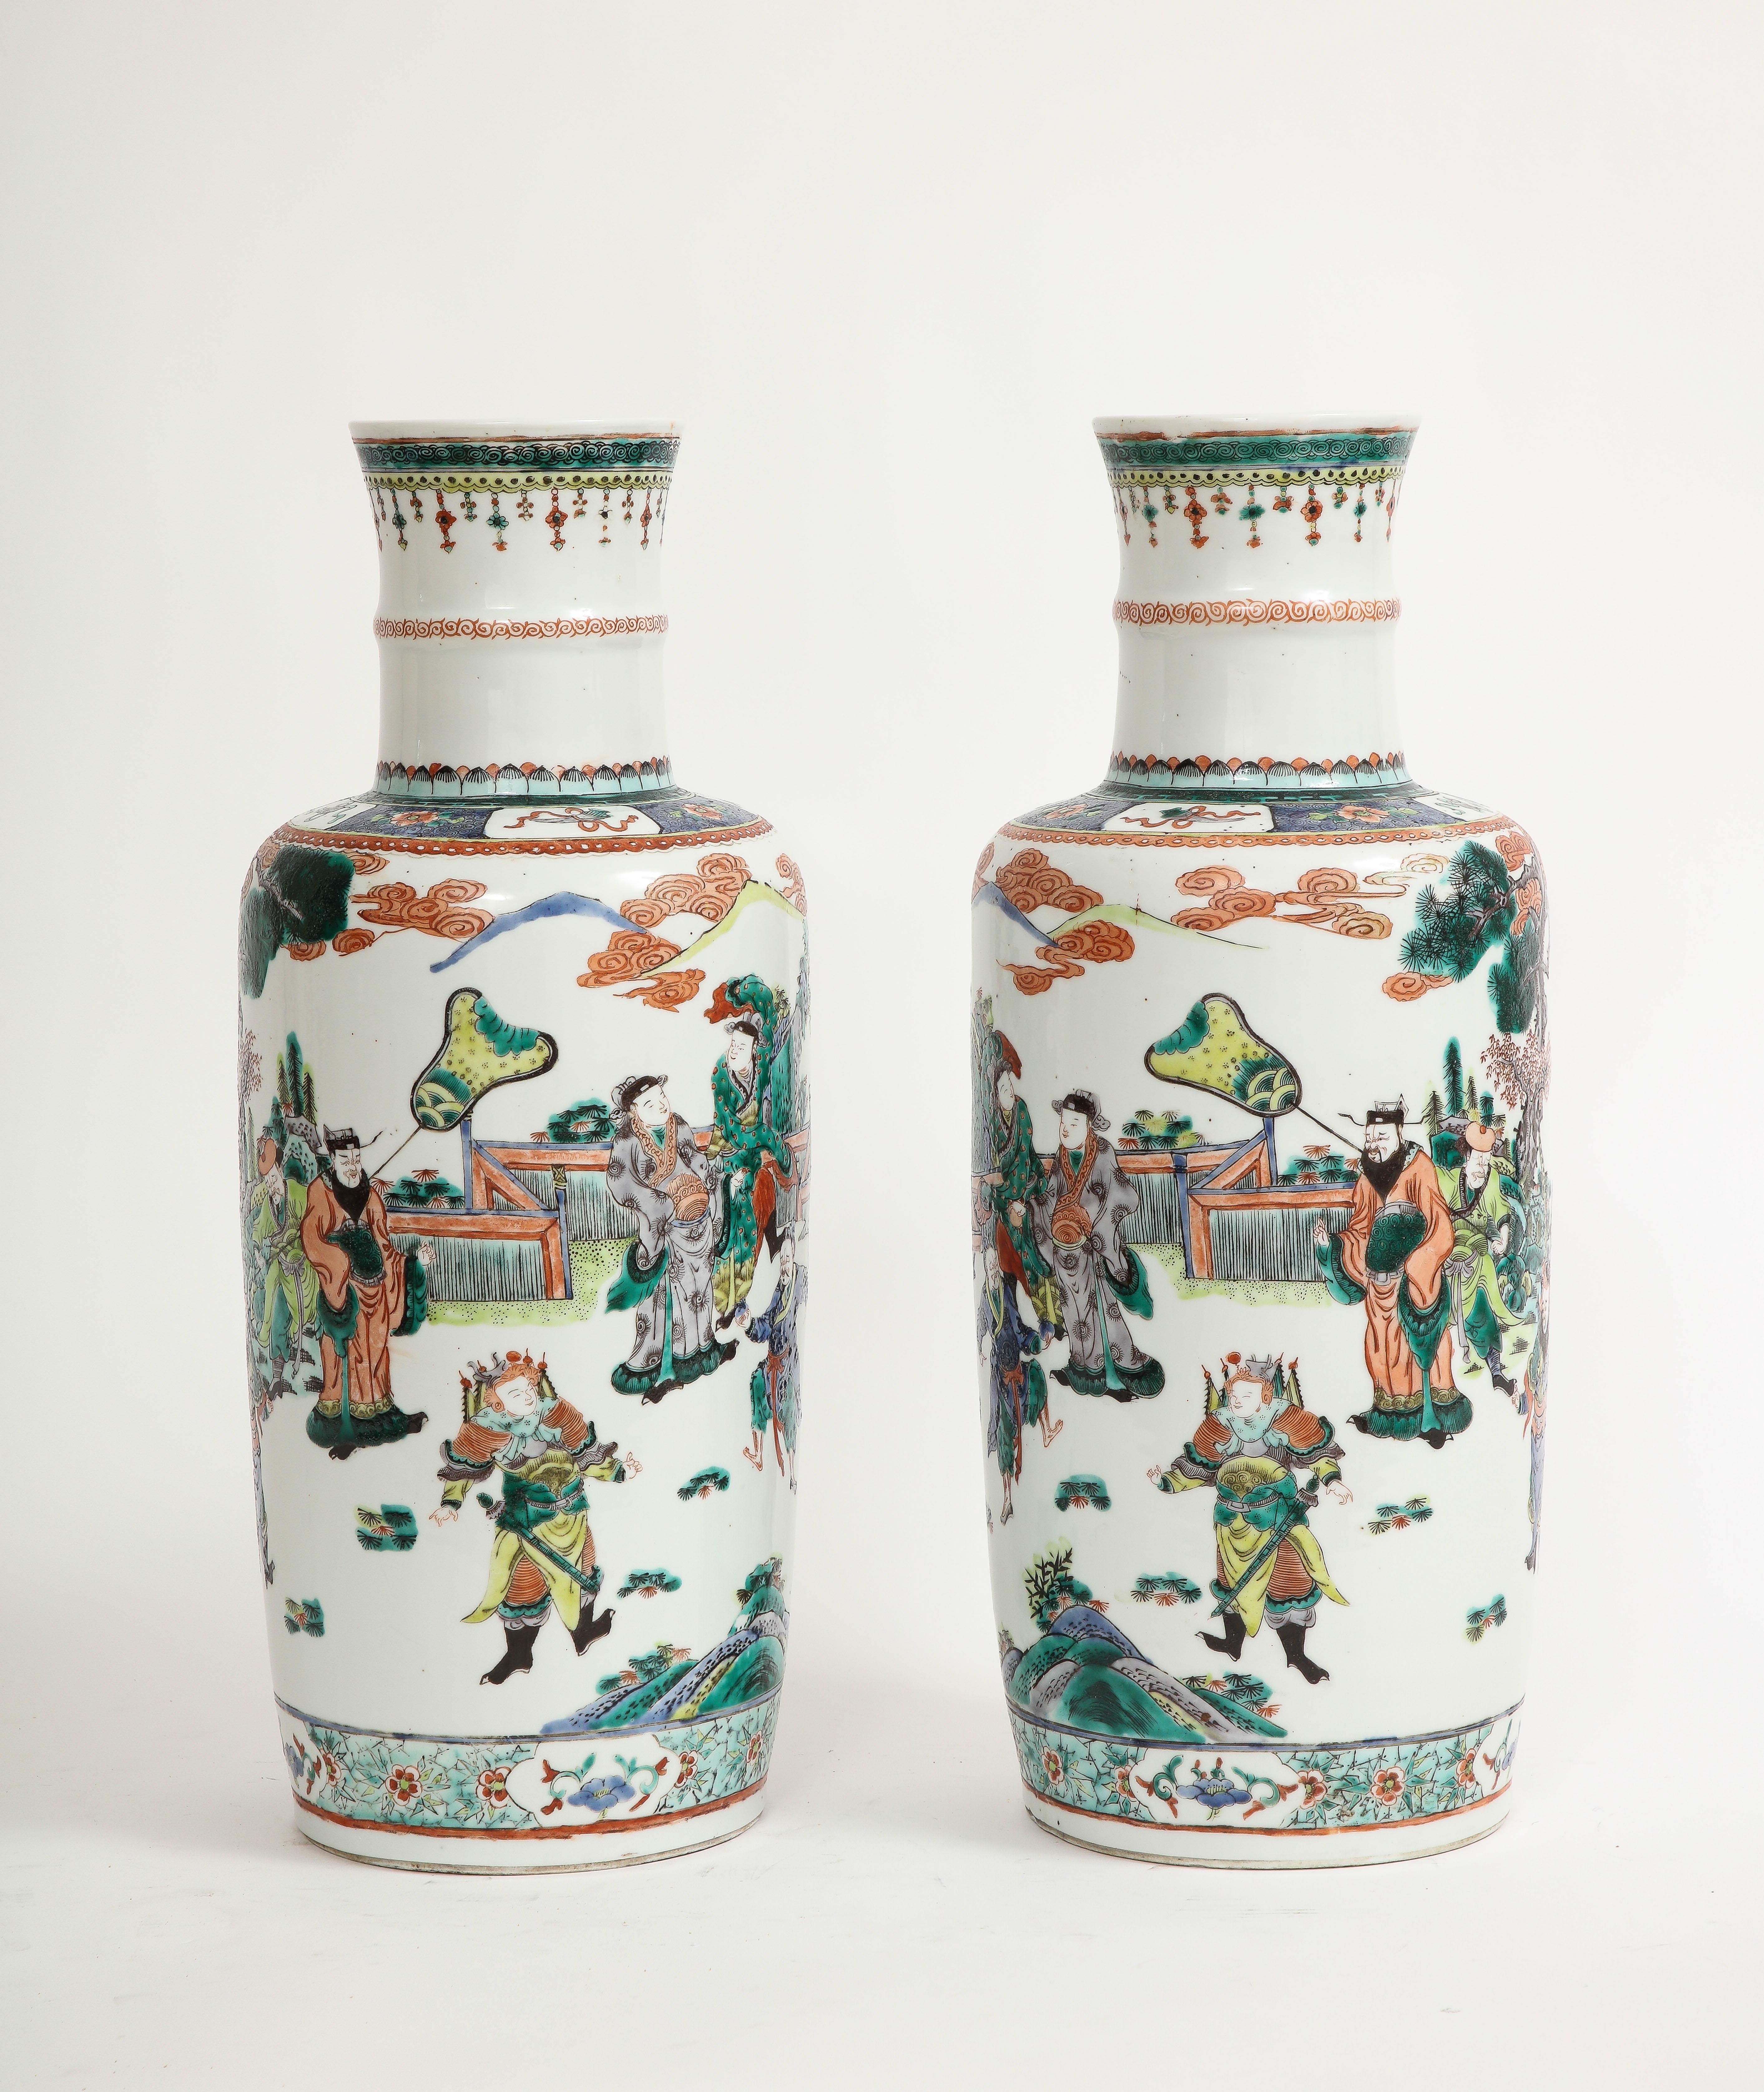 A Pair of Chinese Porcelain Rouleau Form Famille Vert  Imperial Subject Vases, 1800s

Step into the realm of Chinese porcelain mastery with this captivating pair of Chinese Porcelain Rouleau Form Famille Vert Imperial Subject Vases. These remarkable